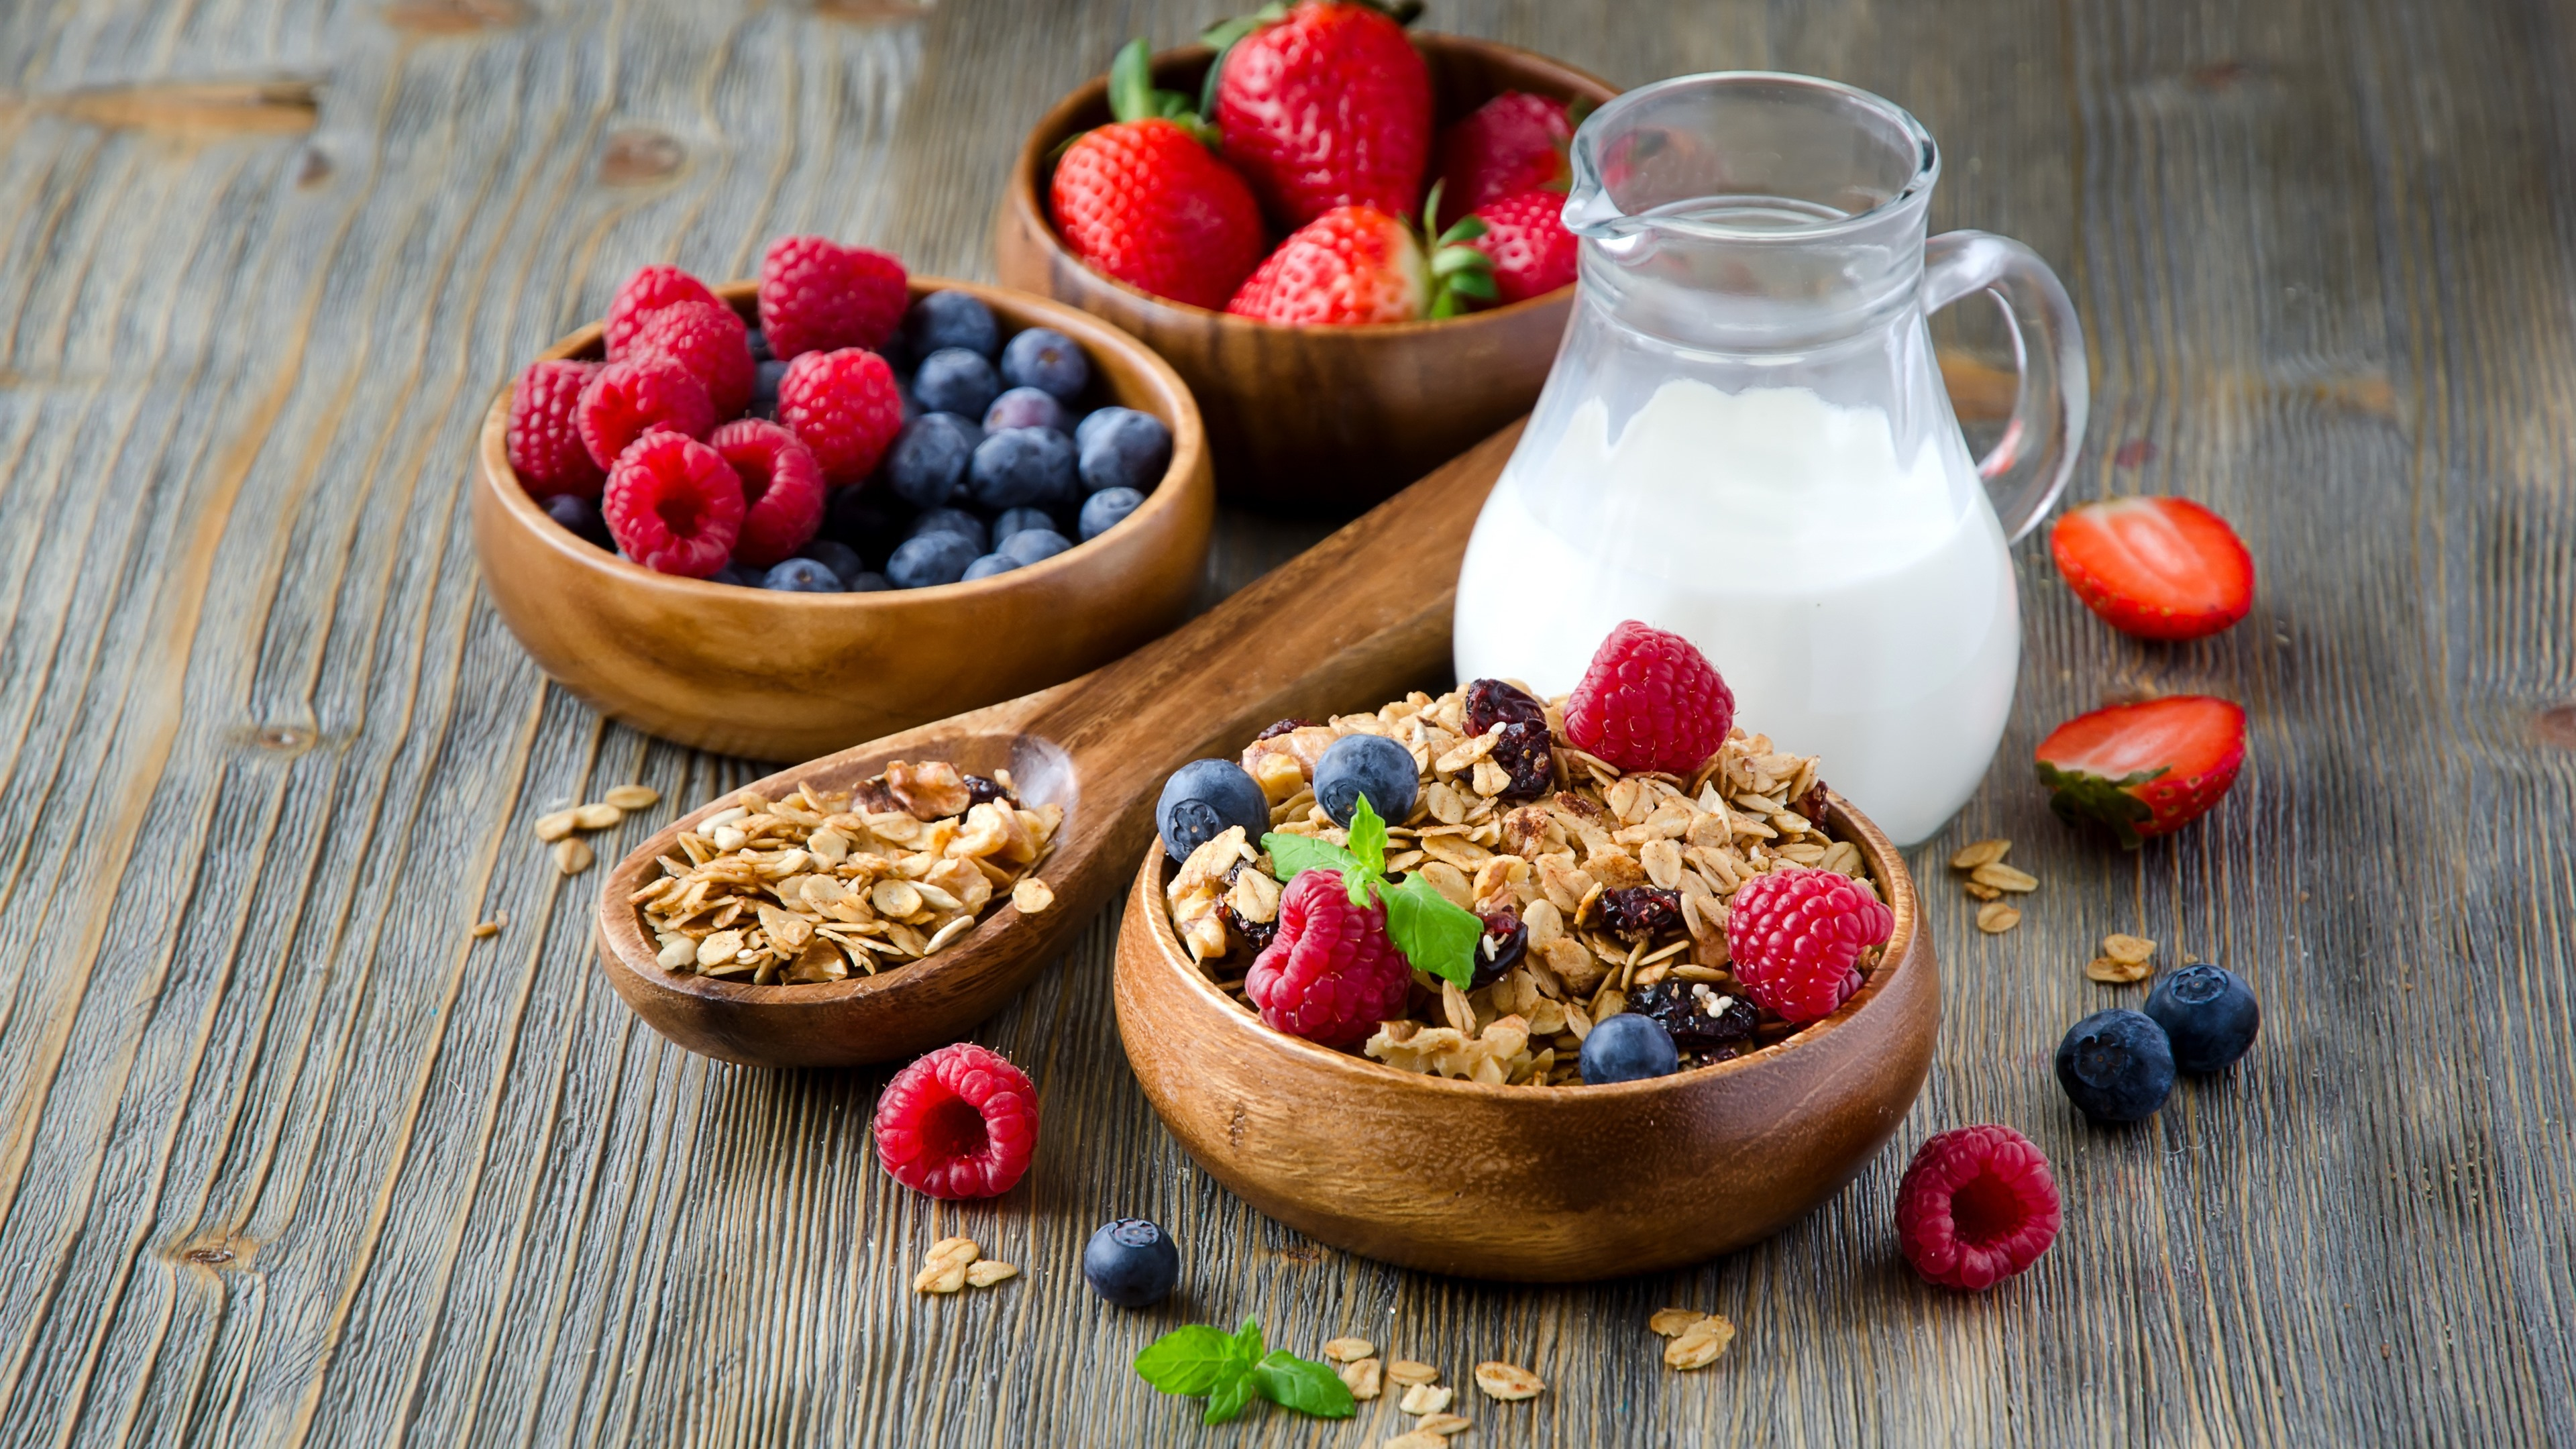 A still life of healthy food with milk and berries